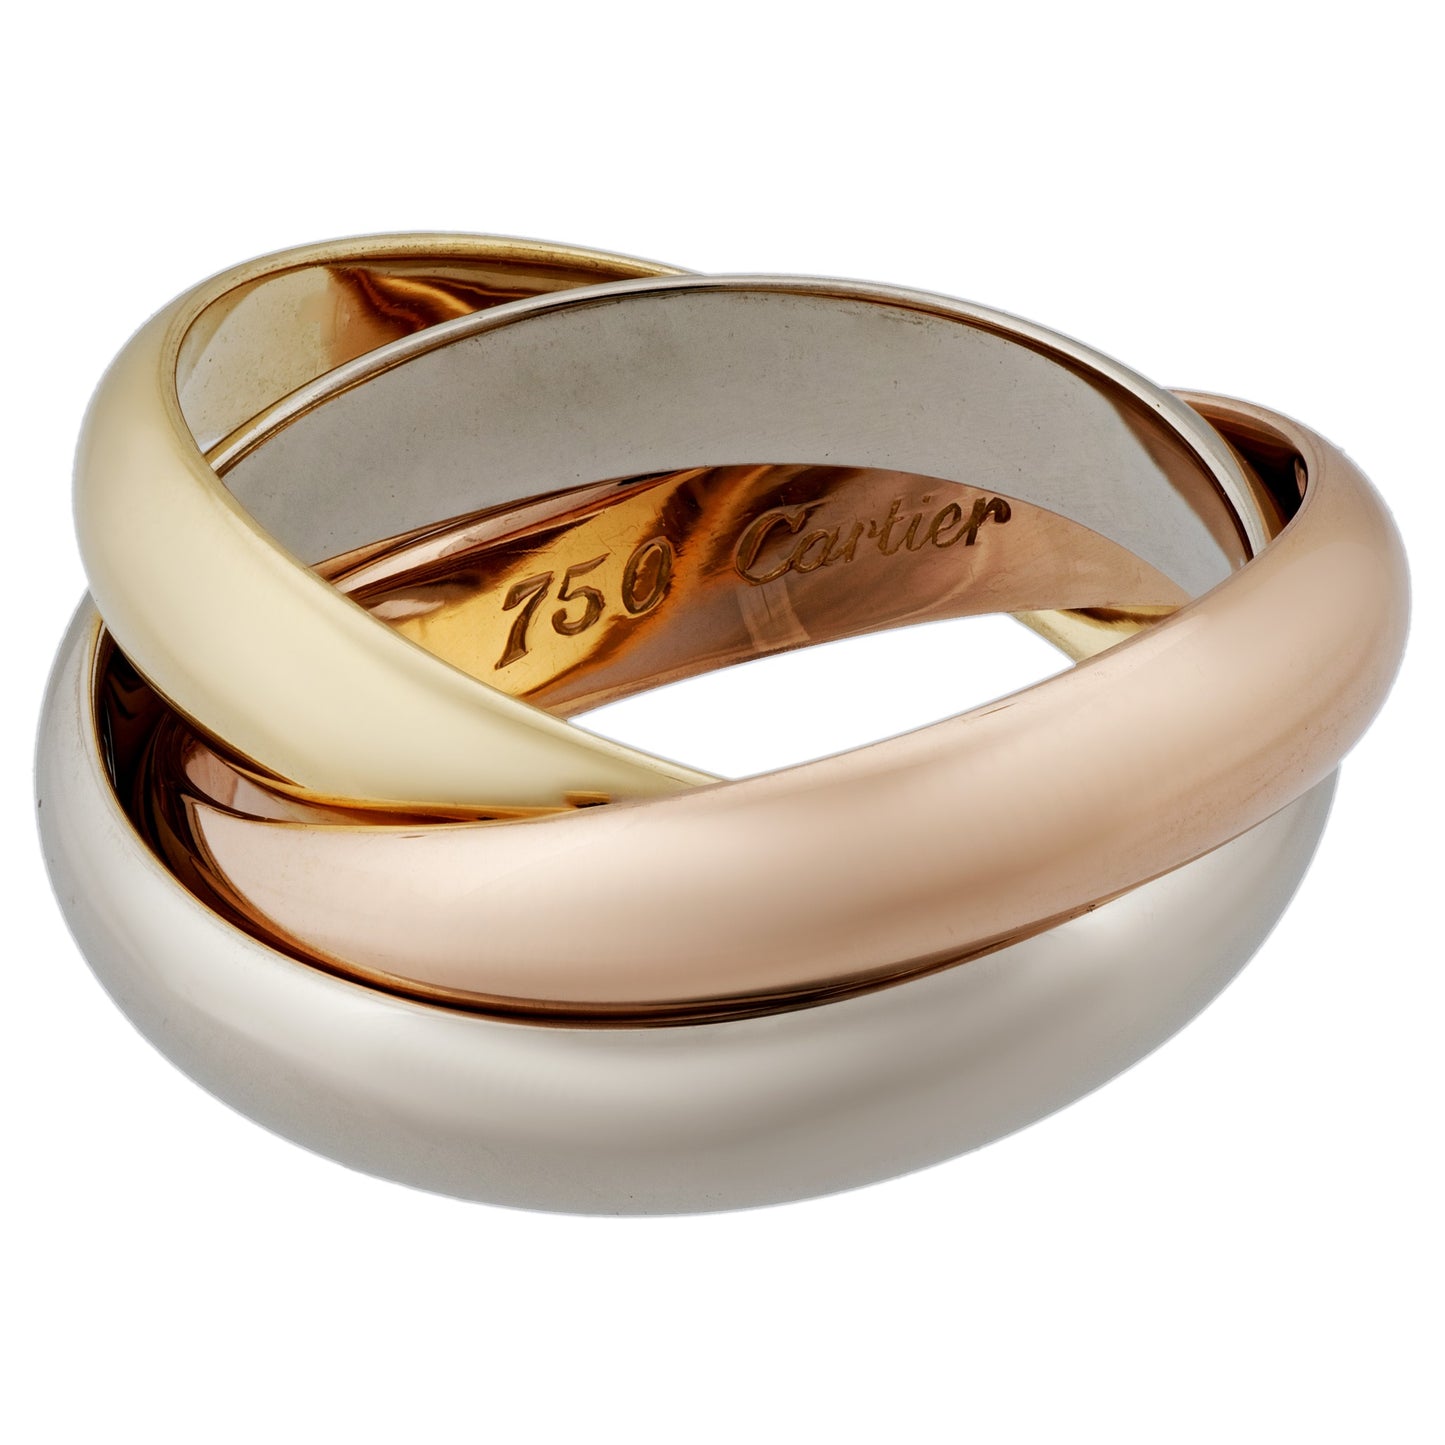 Cartier 18K Yellow, White and Rose Gold Trinity Ring Size 5.75